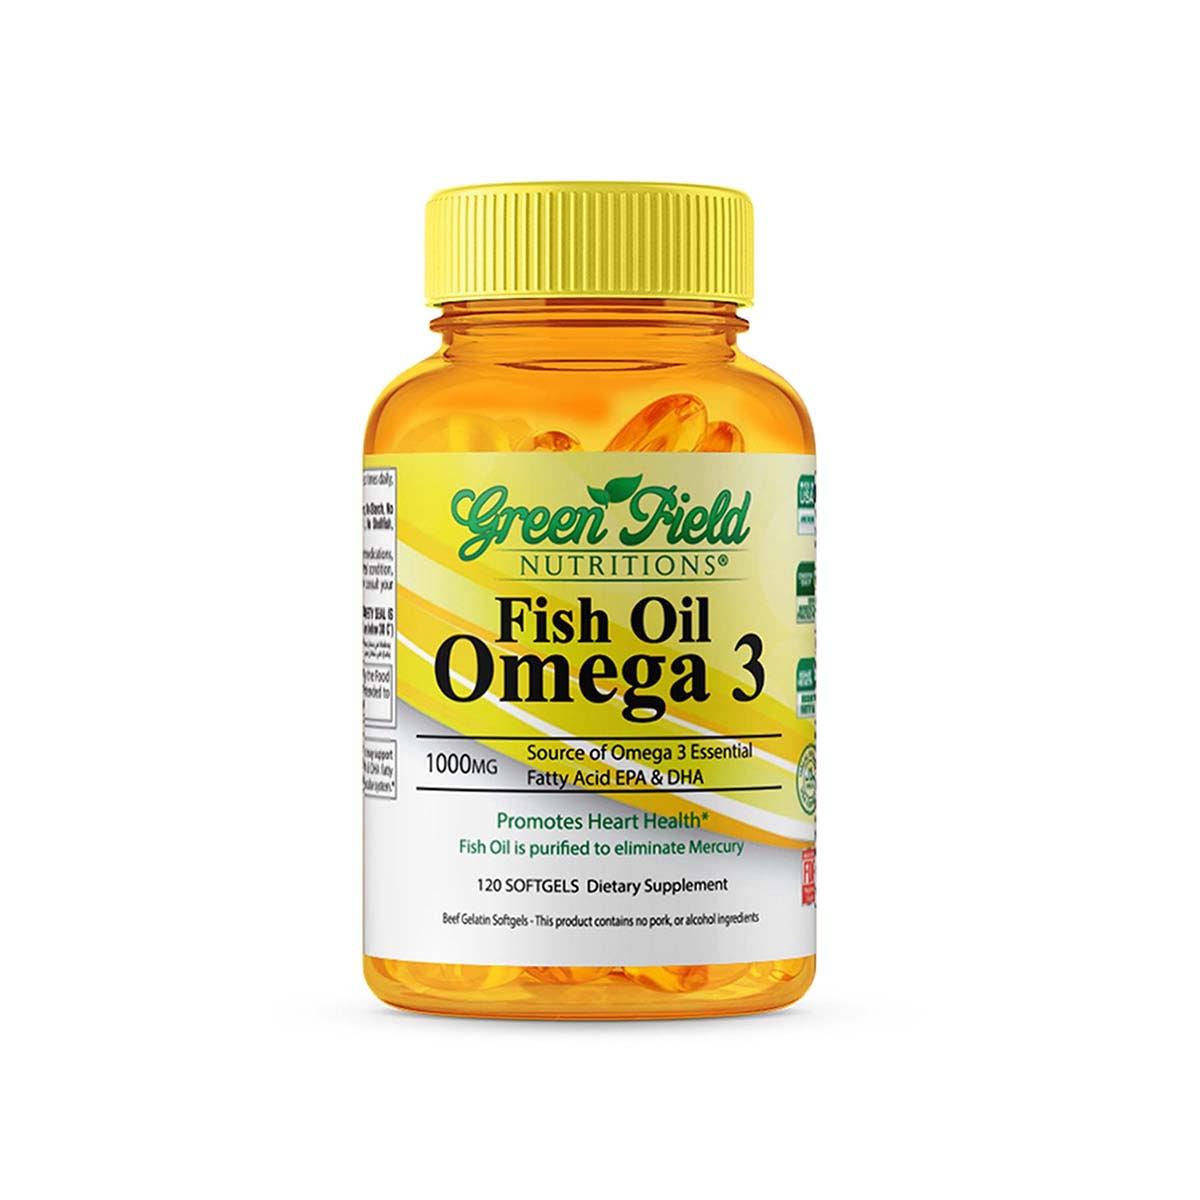 Greenfield Nutritions Fish Oil Omega-3 Dietary Supplement - 1000mg, 120 Softgels